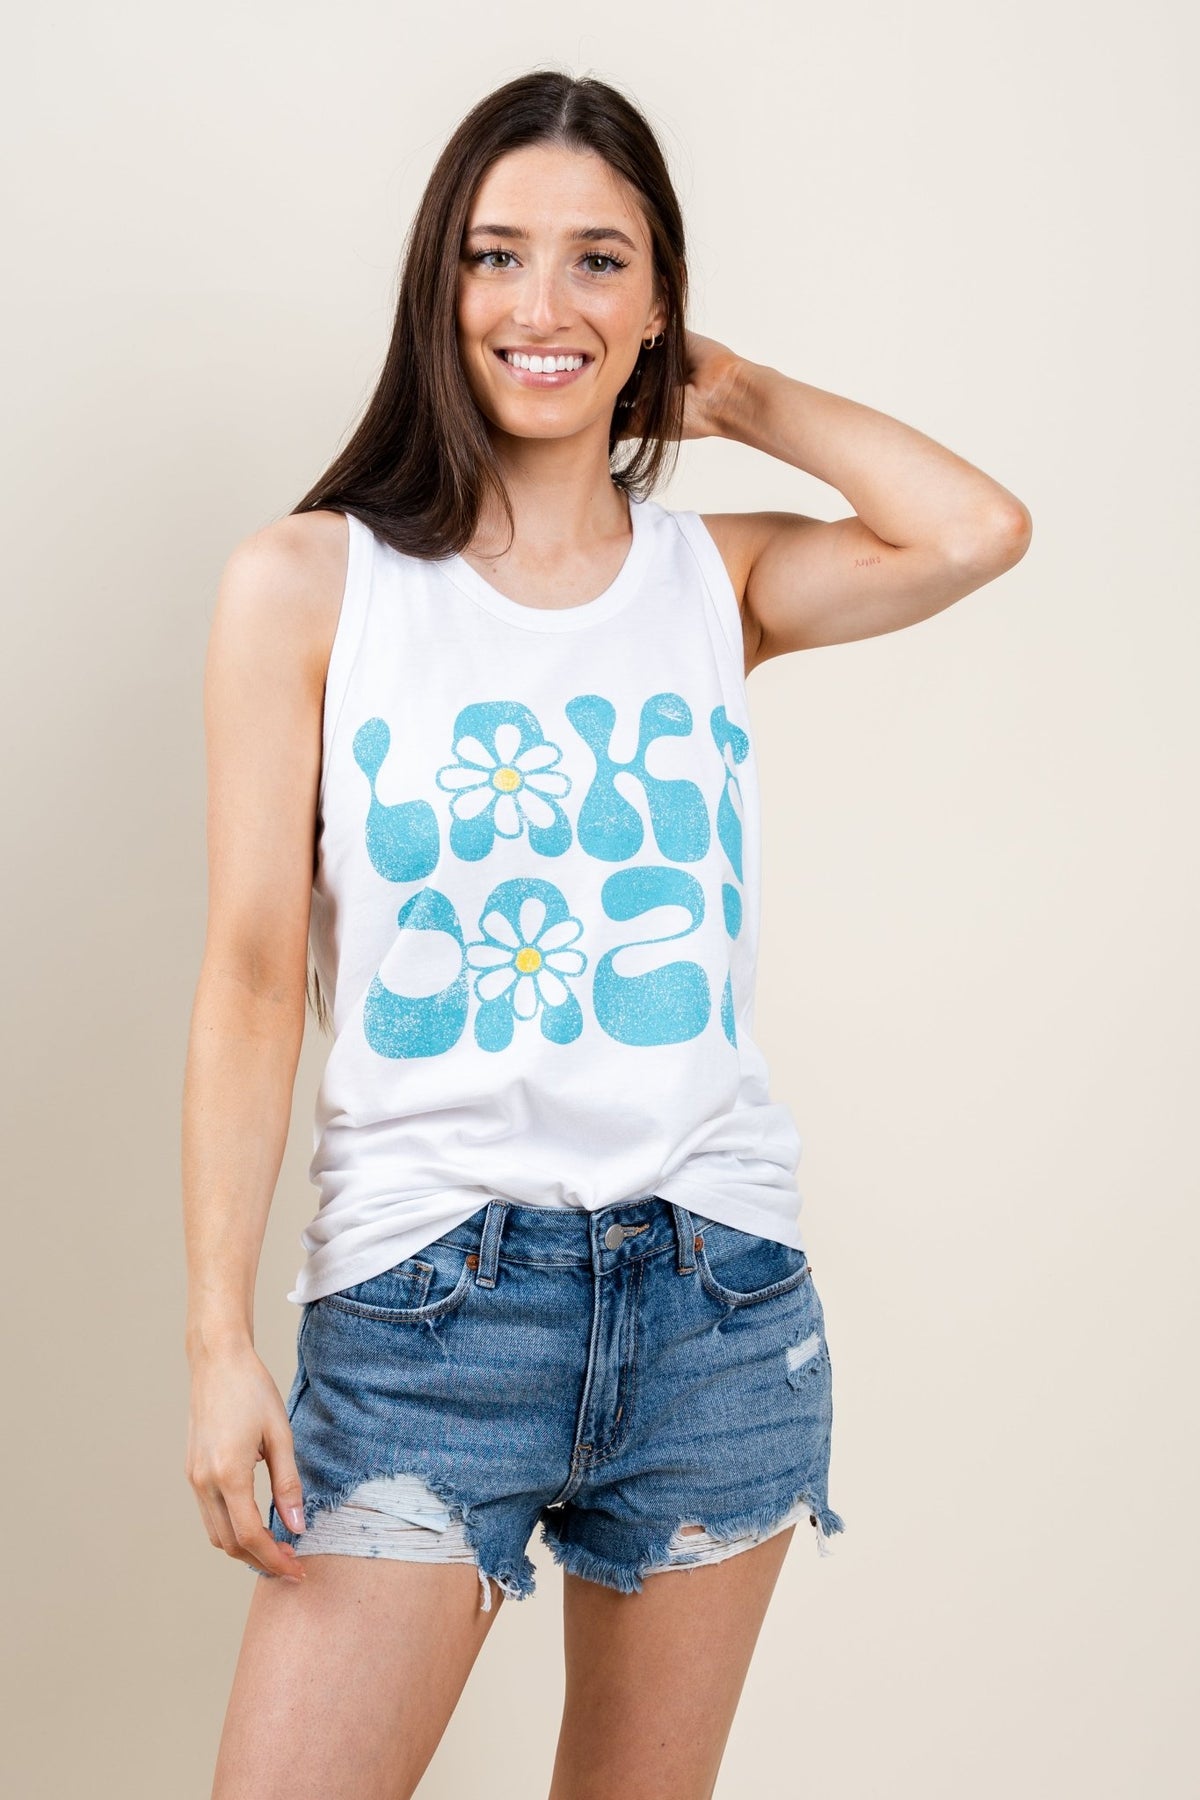 Lake daze comfort wash tank top white - DayDreamer Graphic Band Tees at Lush Fashion Lounge Trendy Boutique in Oklahoma City